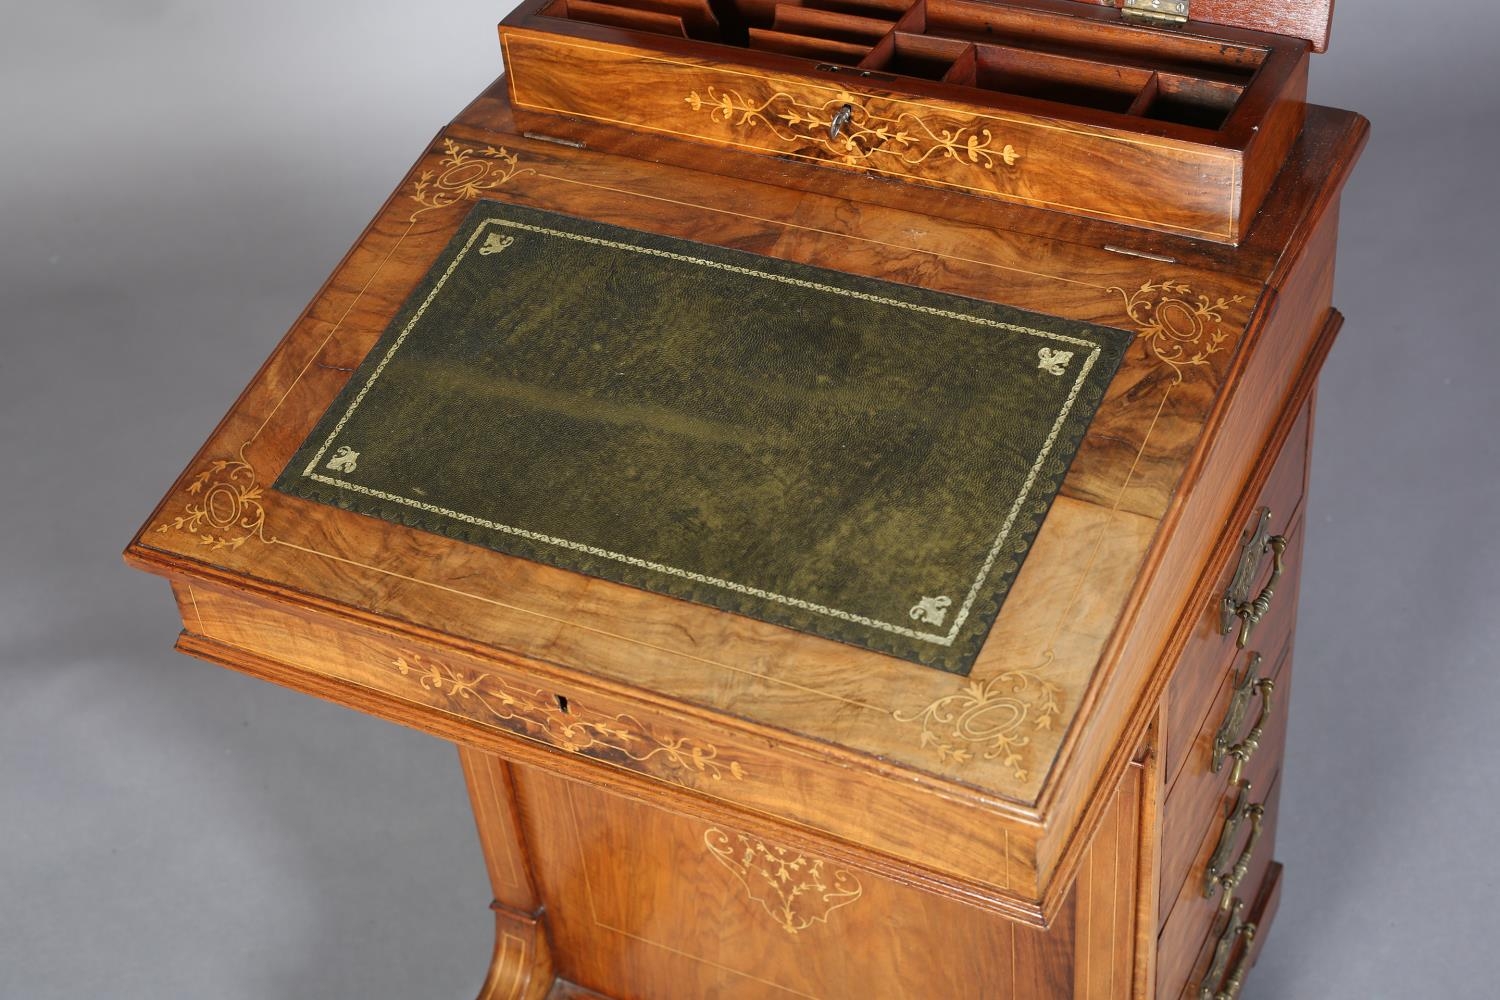 A 19TH CENTURY FIGURED WALNUT AND SATINWOOD INLAID DAVENPORT having a raised compartment, leather - Image 7 of 7